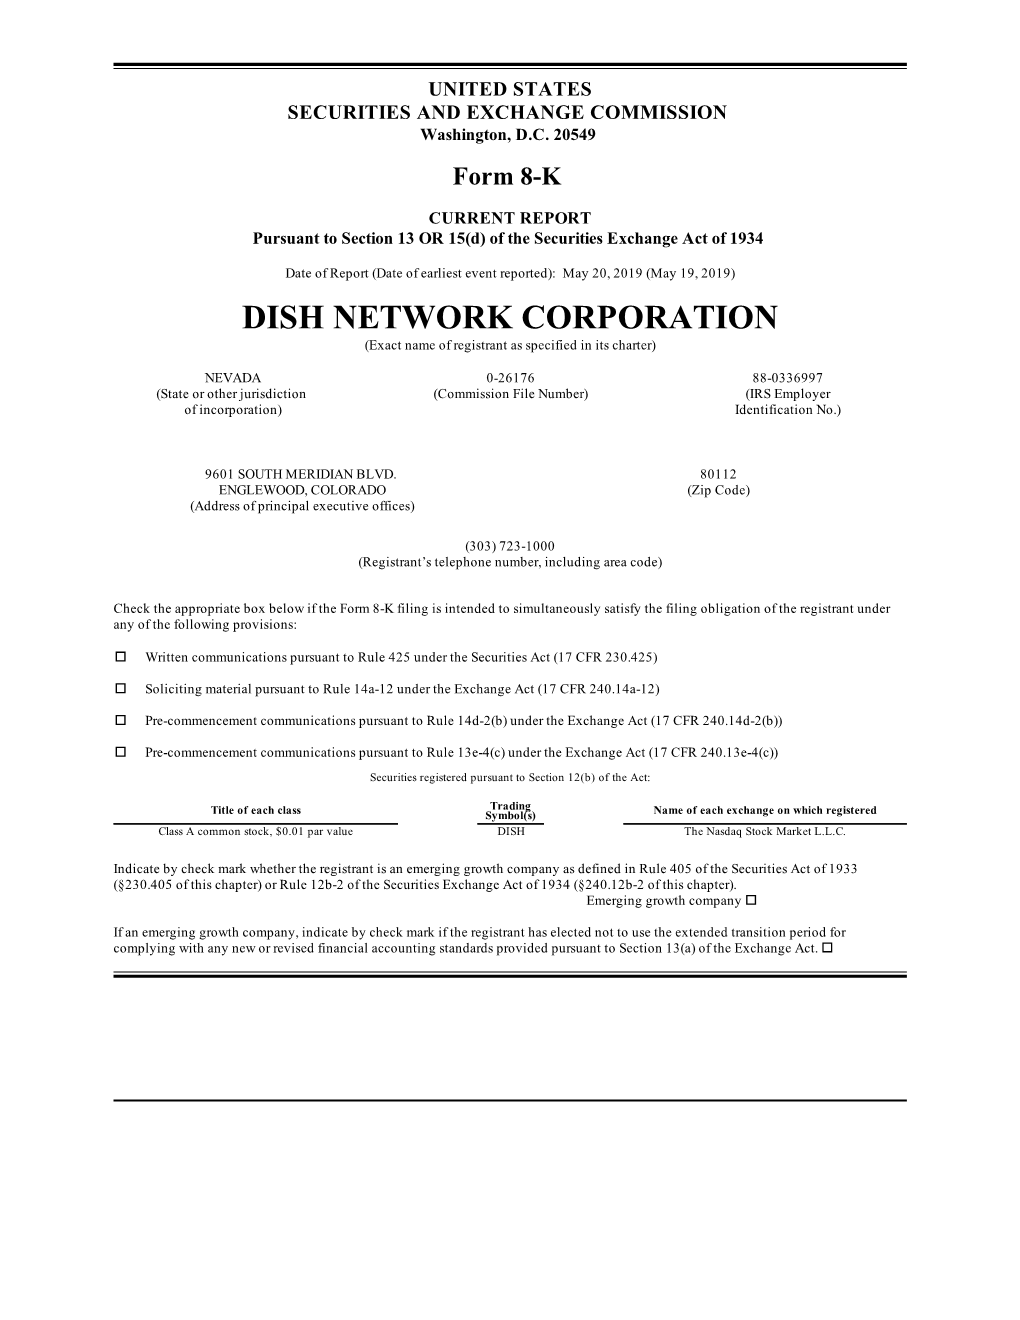 DISH NETWORK CORPORATION (Exact Name of Registrant As Specified in Its Charter)